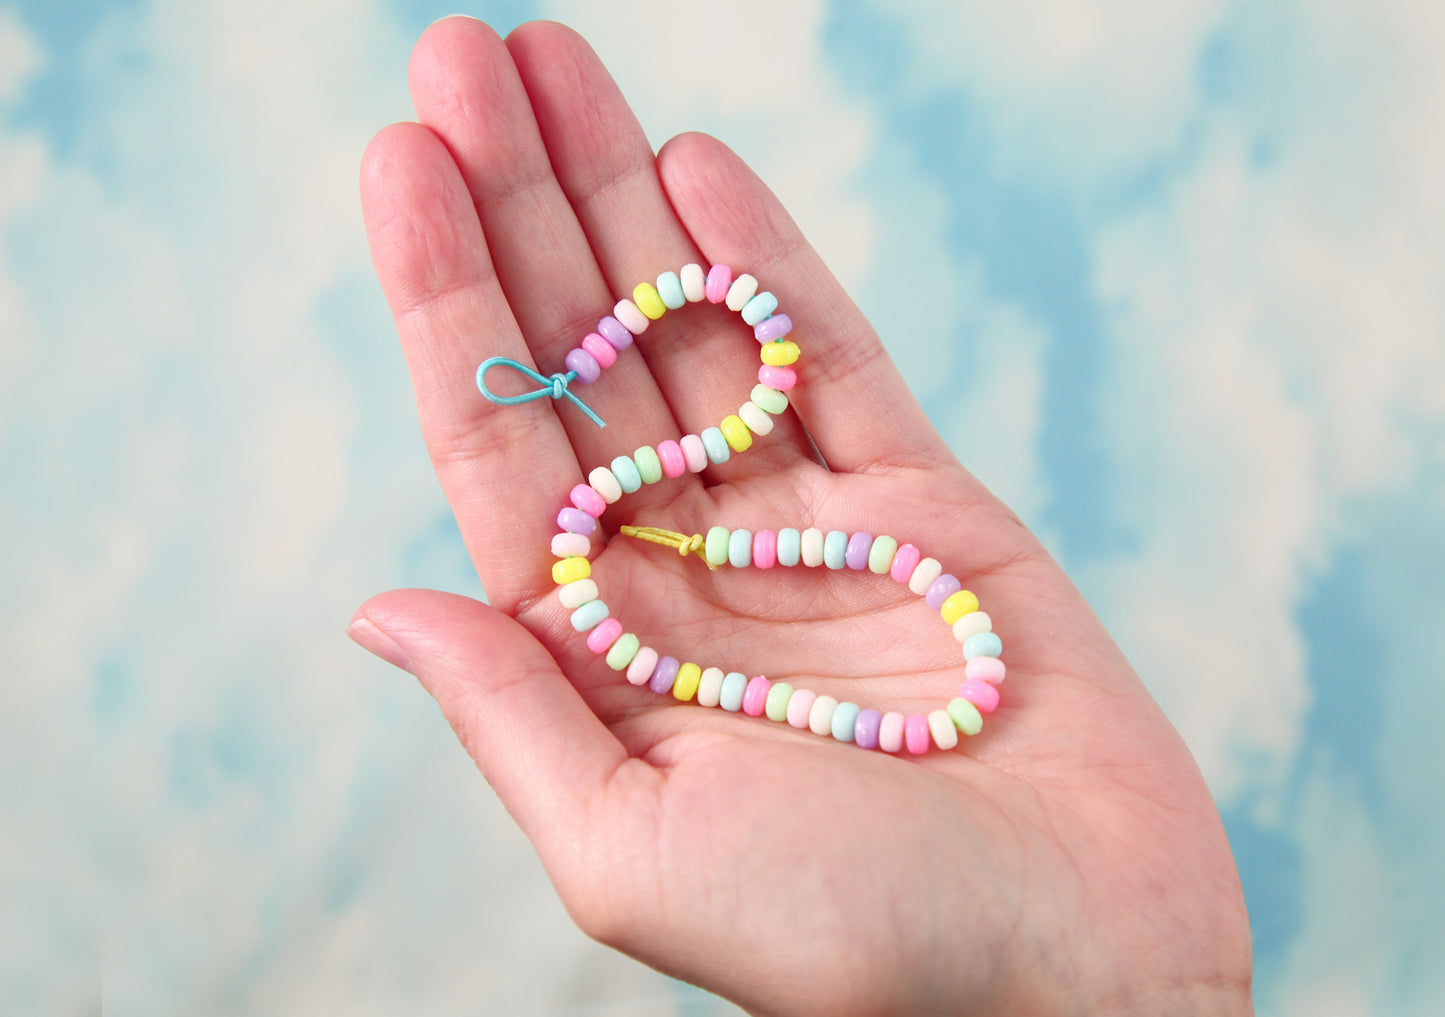 Candy Necklace Beads - 5mm Tiny Candy Color Rondelle Pastel Disc Shaped Faux Candies Acrylic or Plastic Beads - 500 pc set